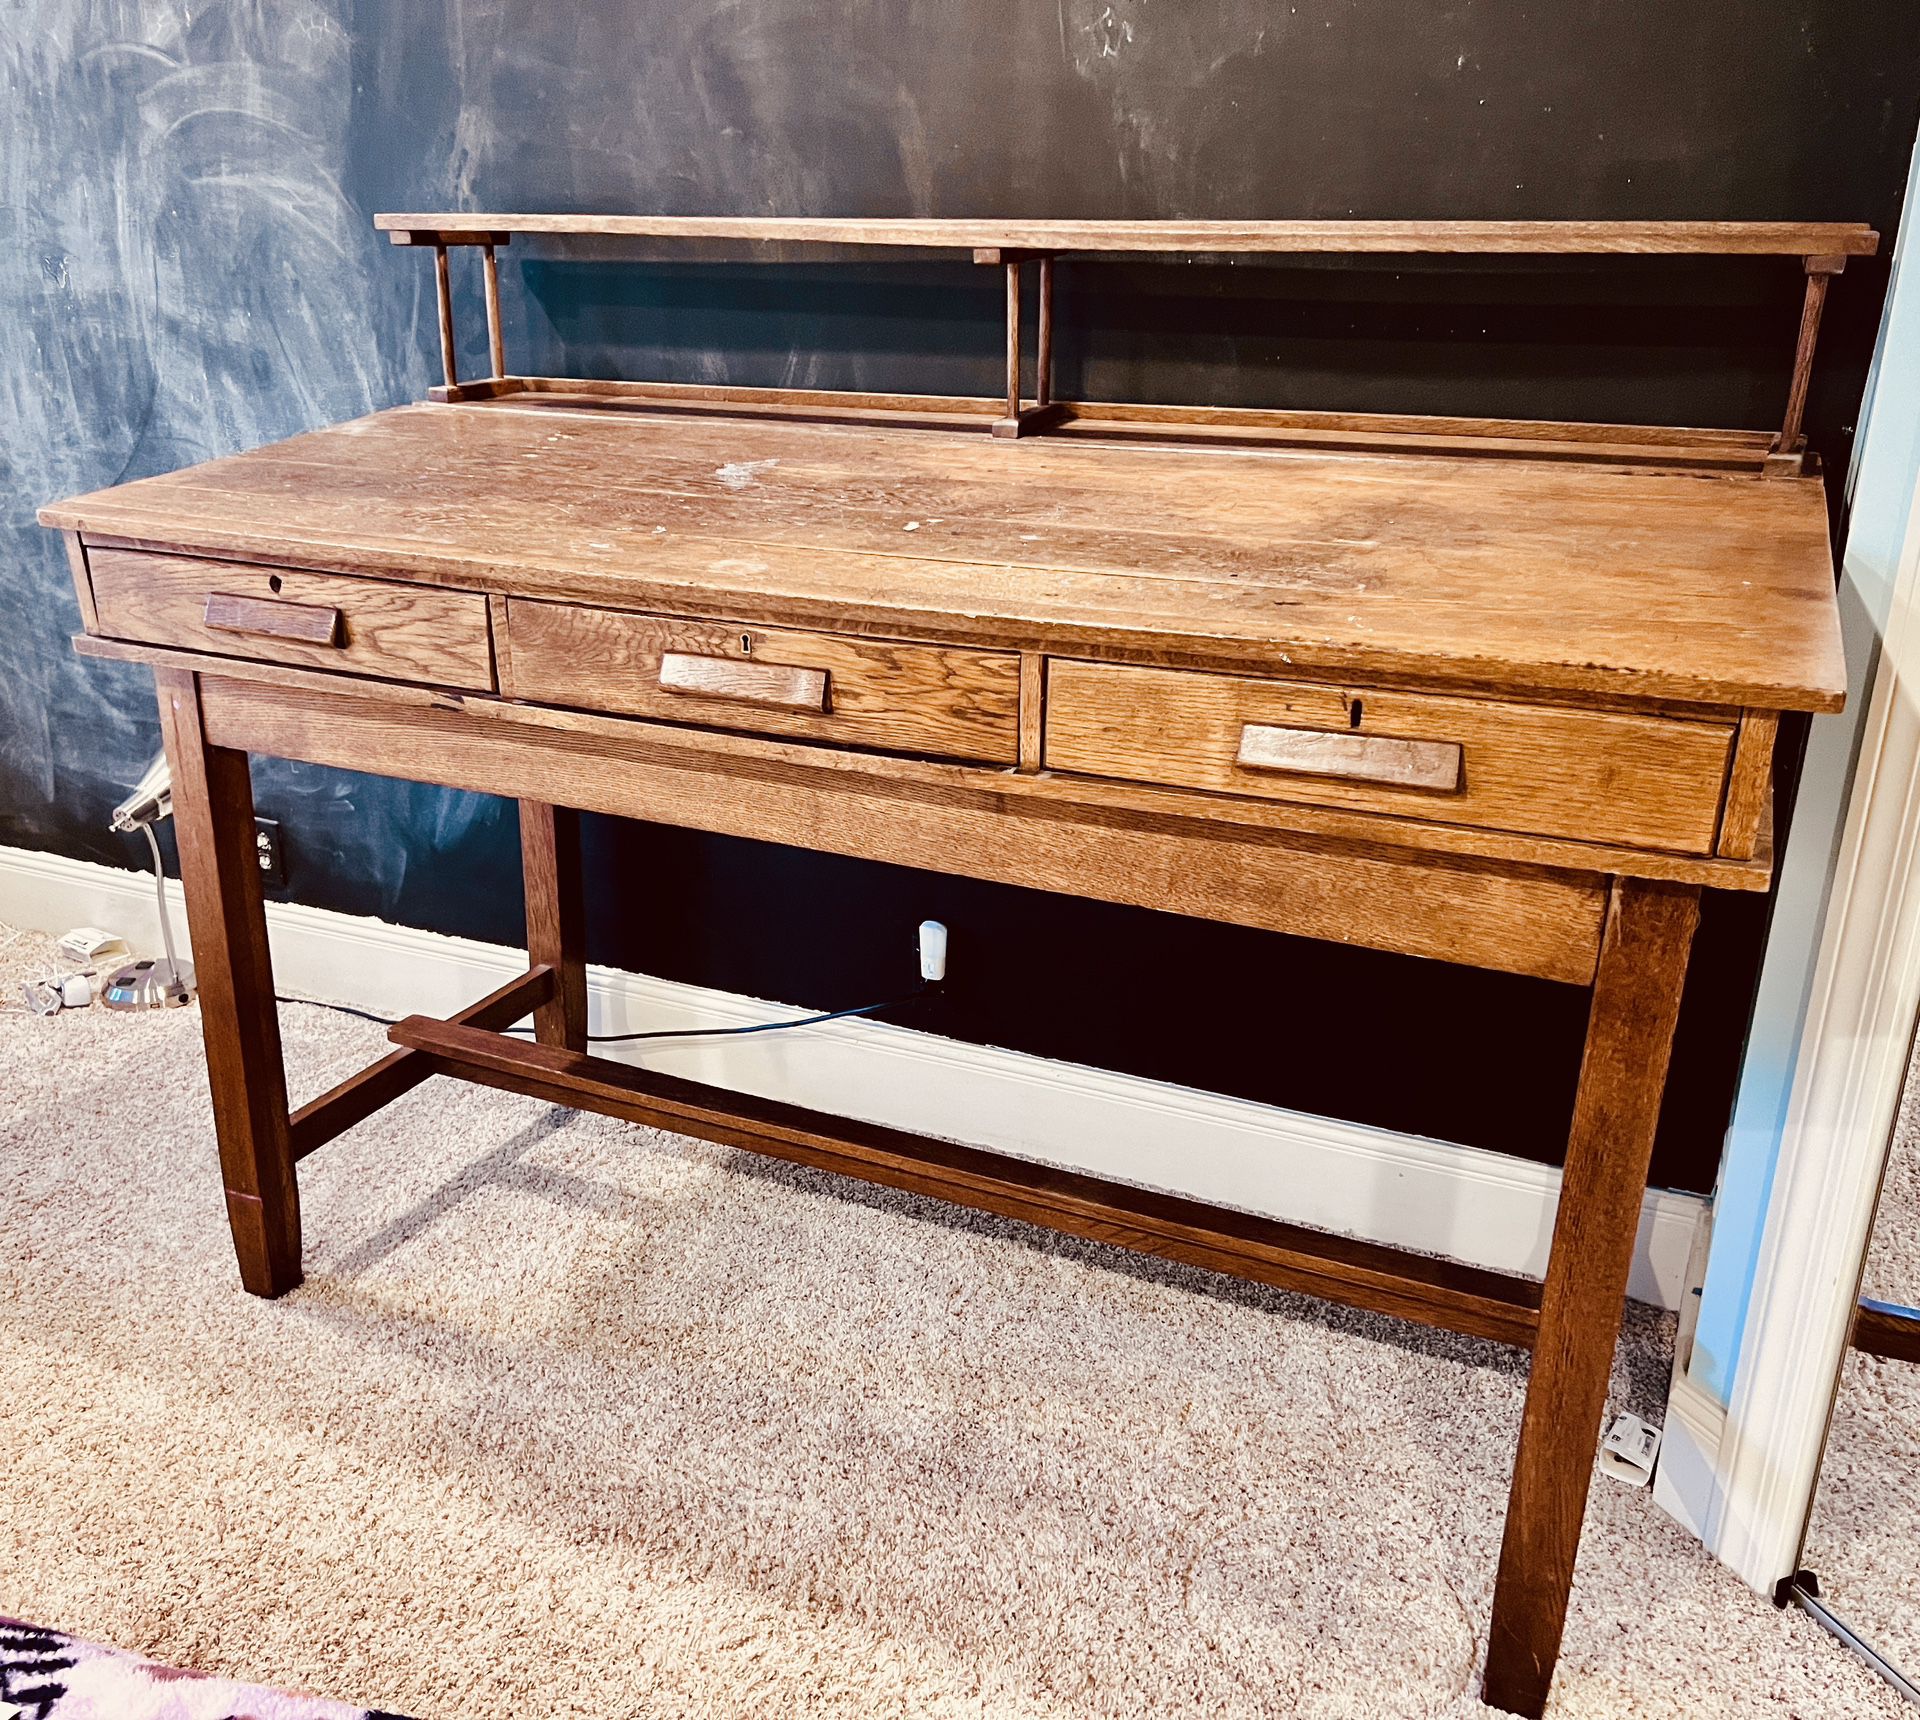 Antique Oak Railroad Clerk Standing Desk with Slant Top and Drawers - Early 1900s